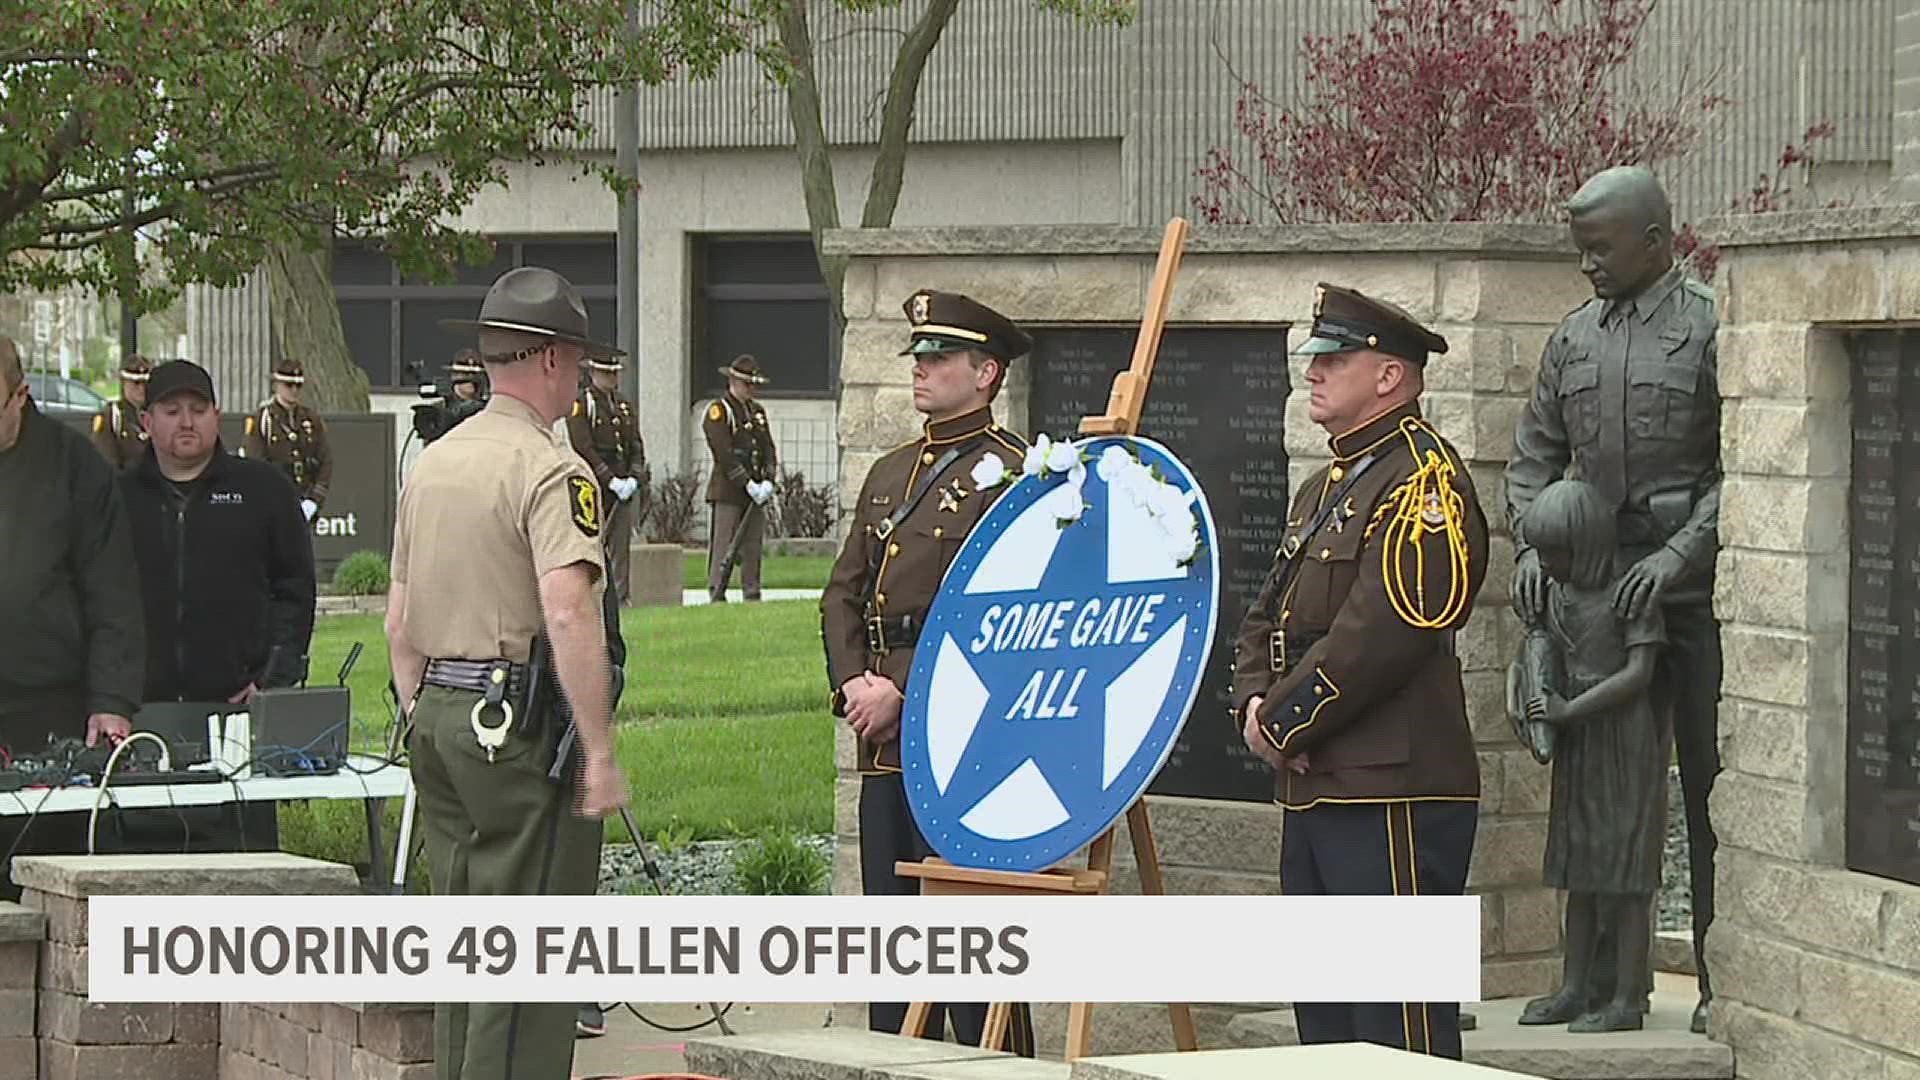 Since 1869, 49 law enforcement officers have died while on duty. The most recent was on Friday, April 29 when Knox County Deputy Nicholas Weist died on the job.